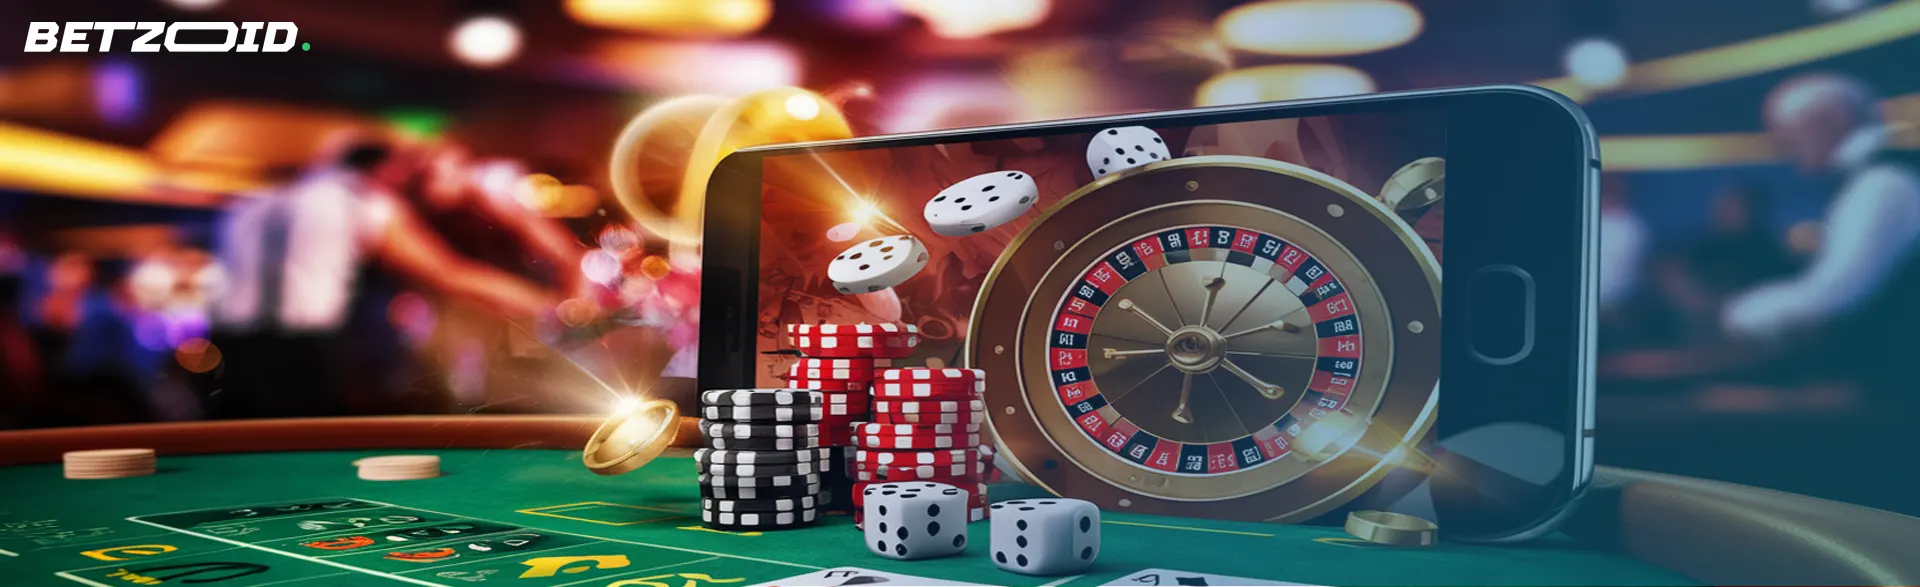 Online casinos no deposit boonus with smartphone with cards and roulette on table.